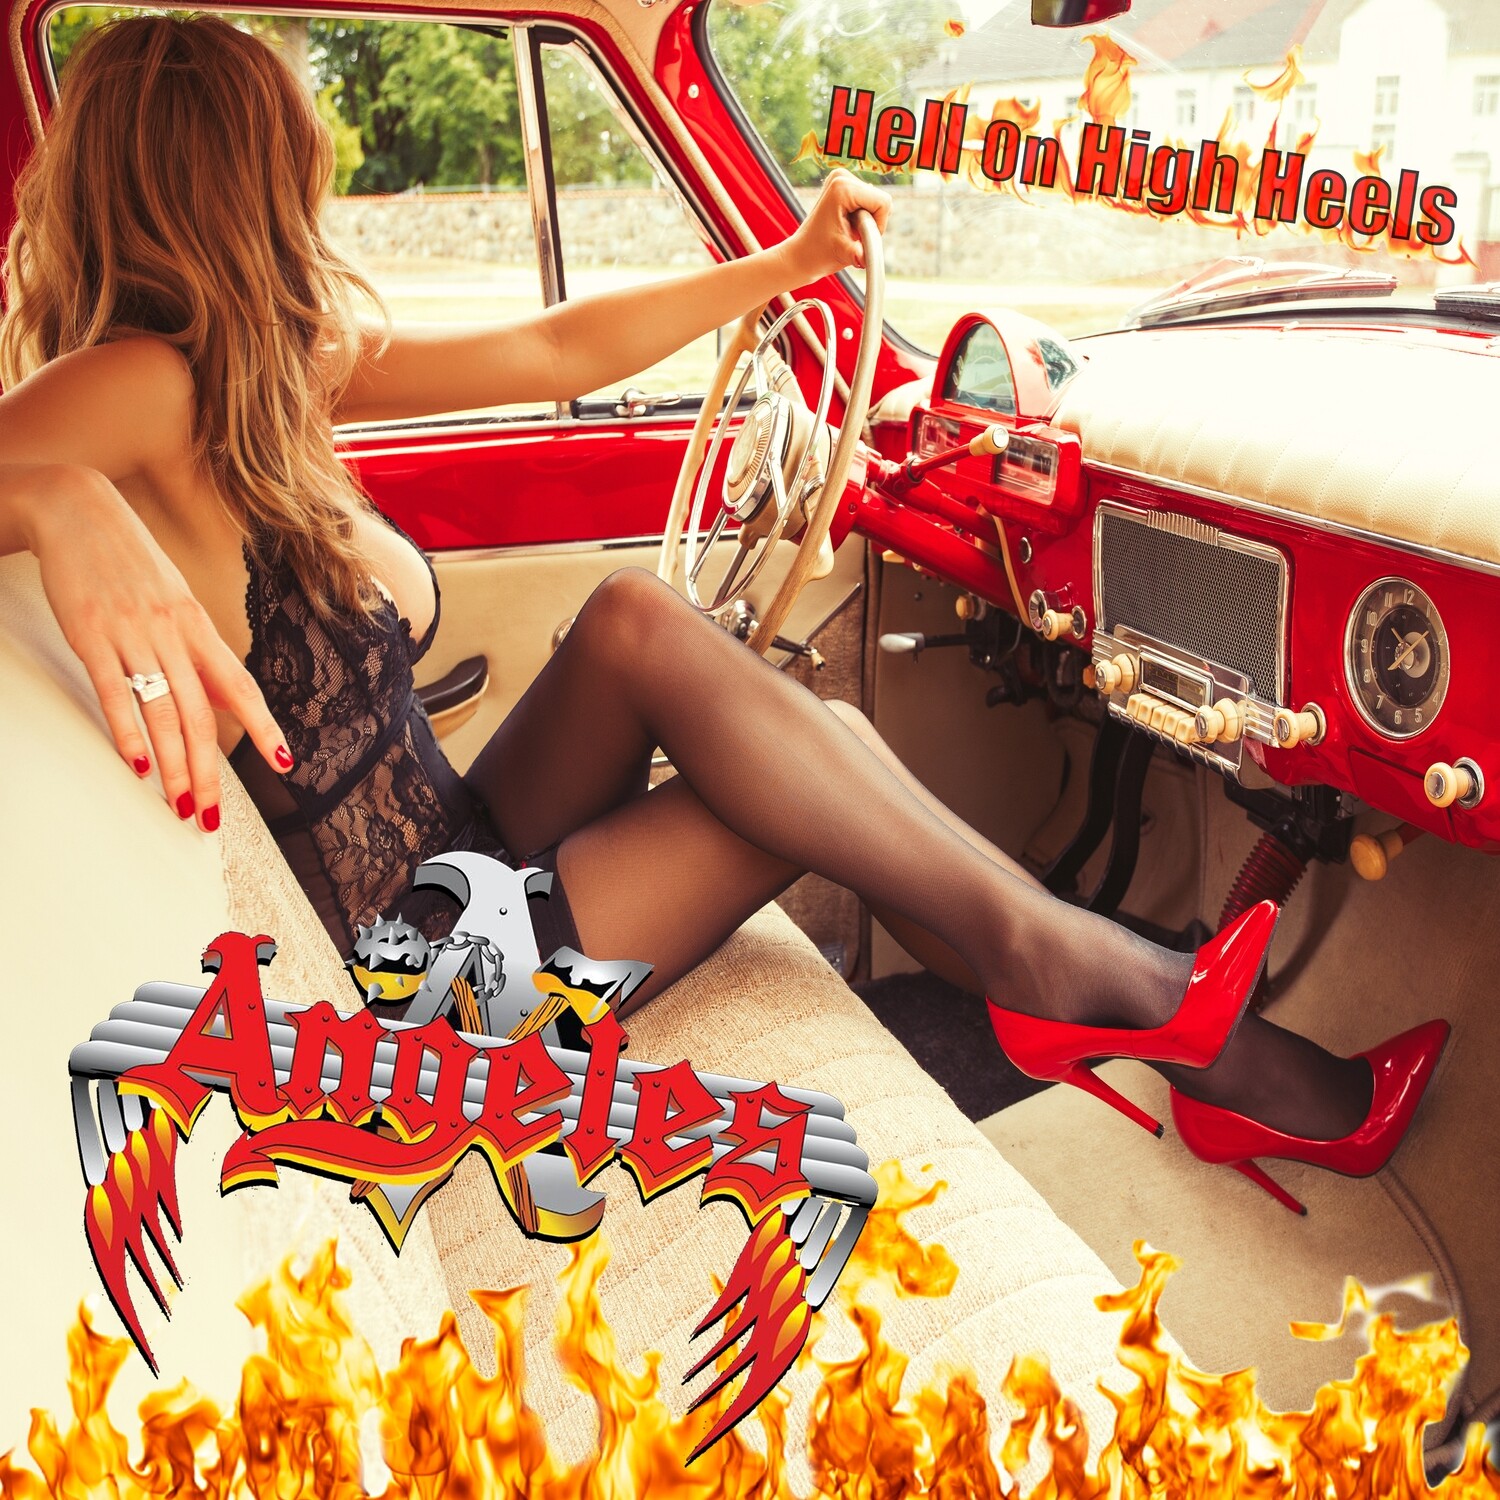 Hell On High Heels by Angeles [CD]